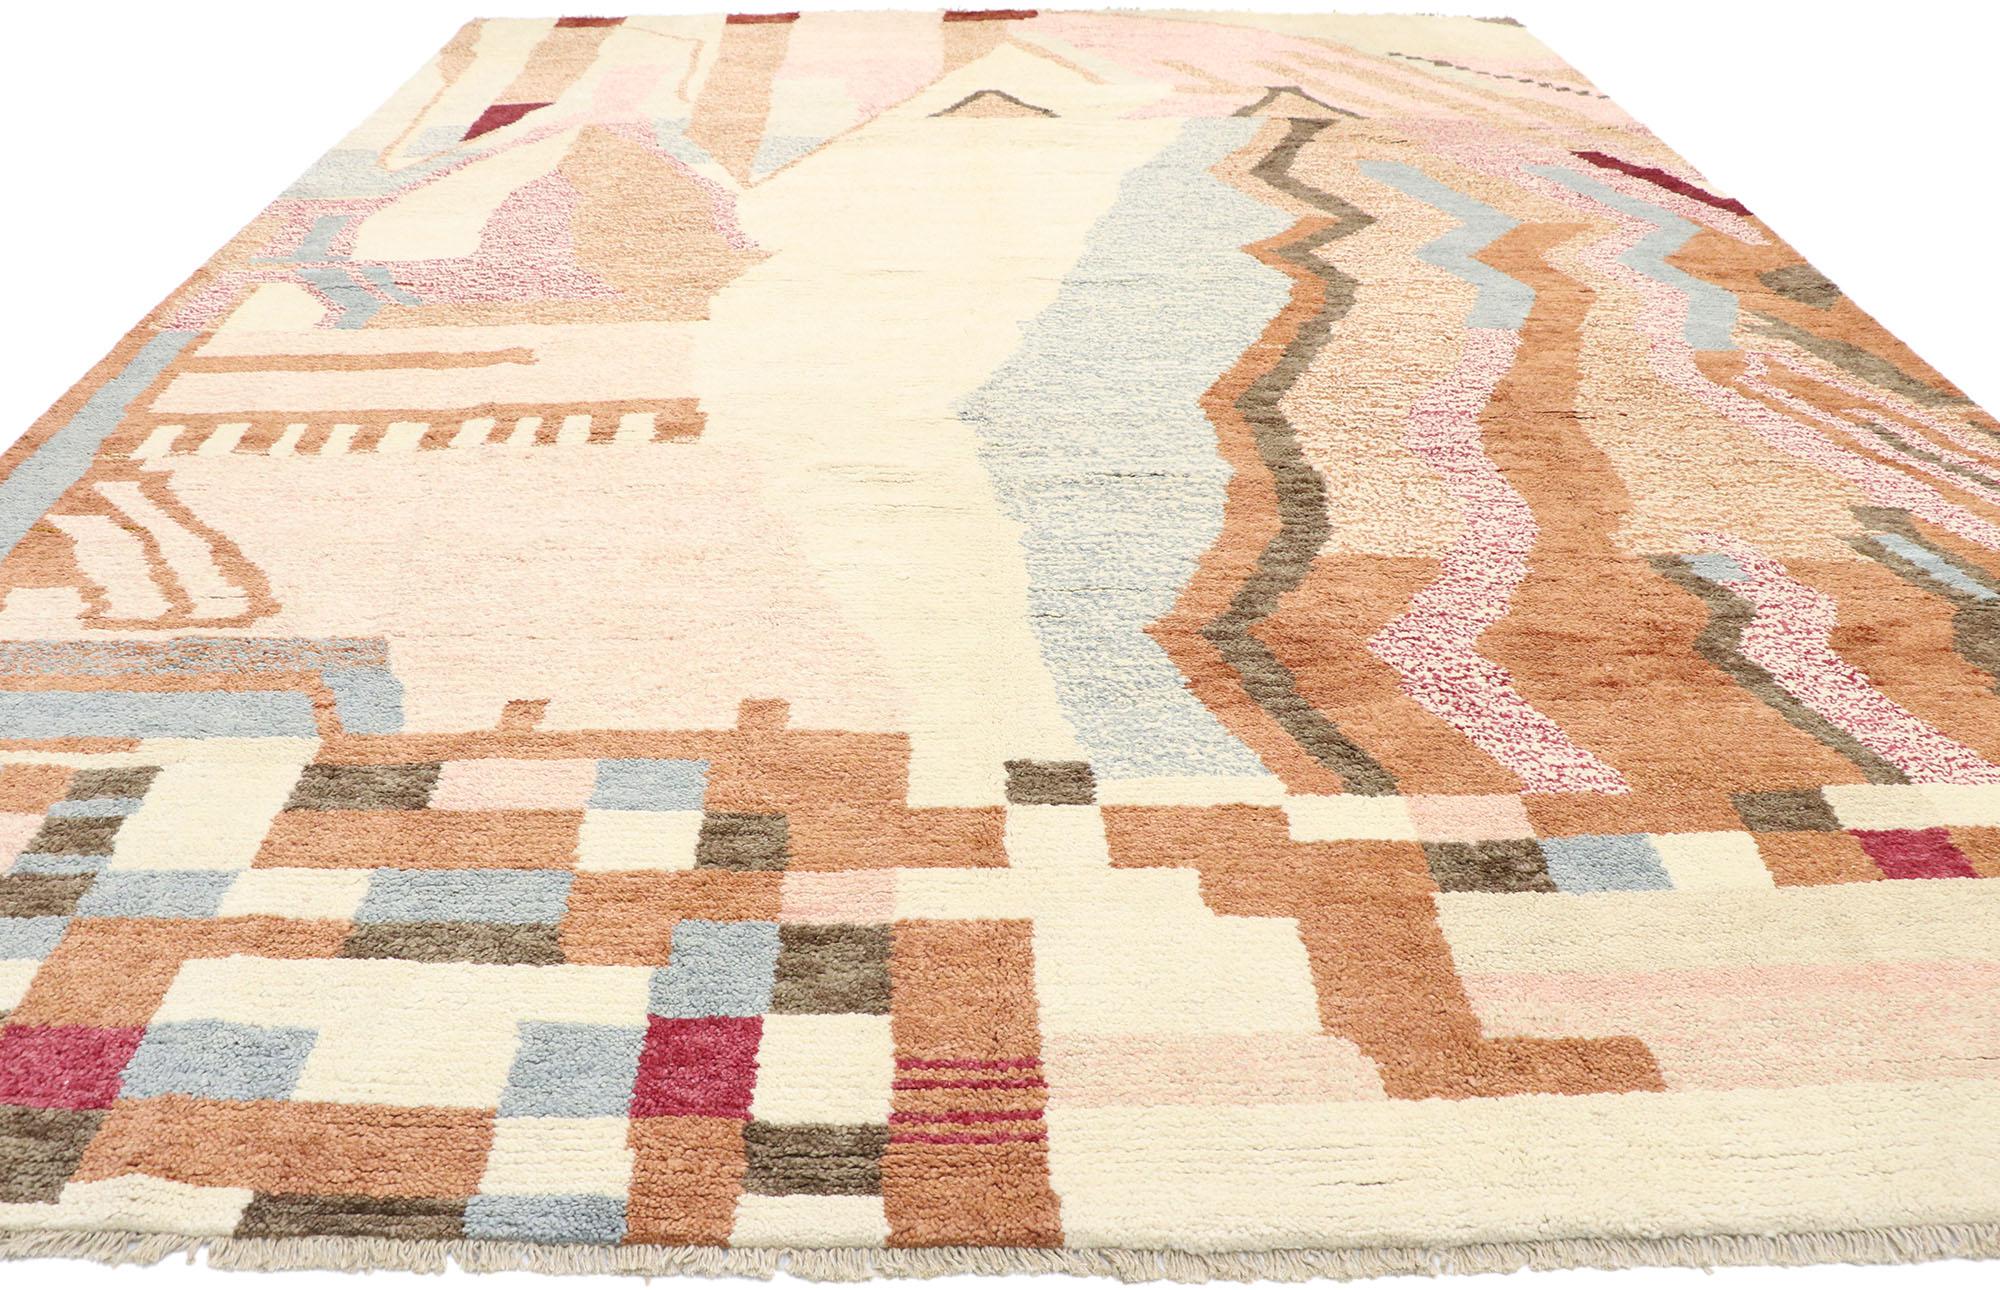 Tribal New Contemporary Moroccan Style Rug with Boho Chic Postmodern Design